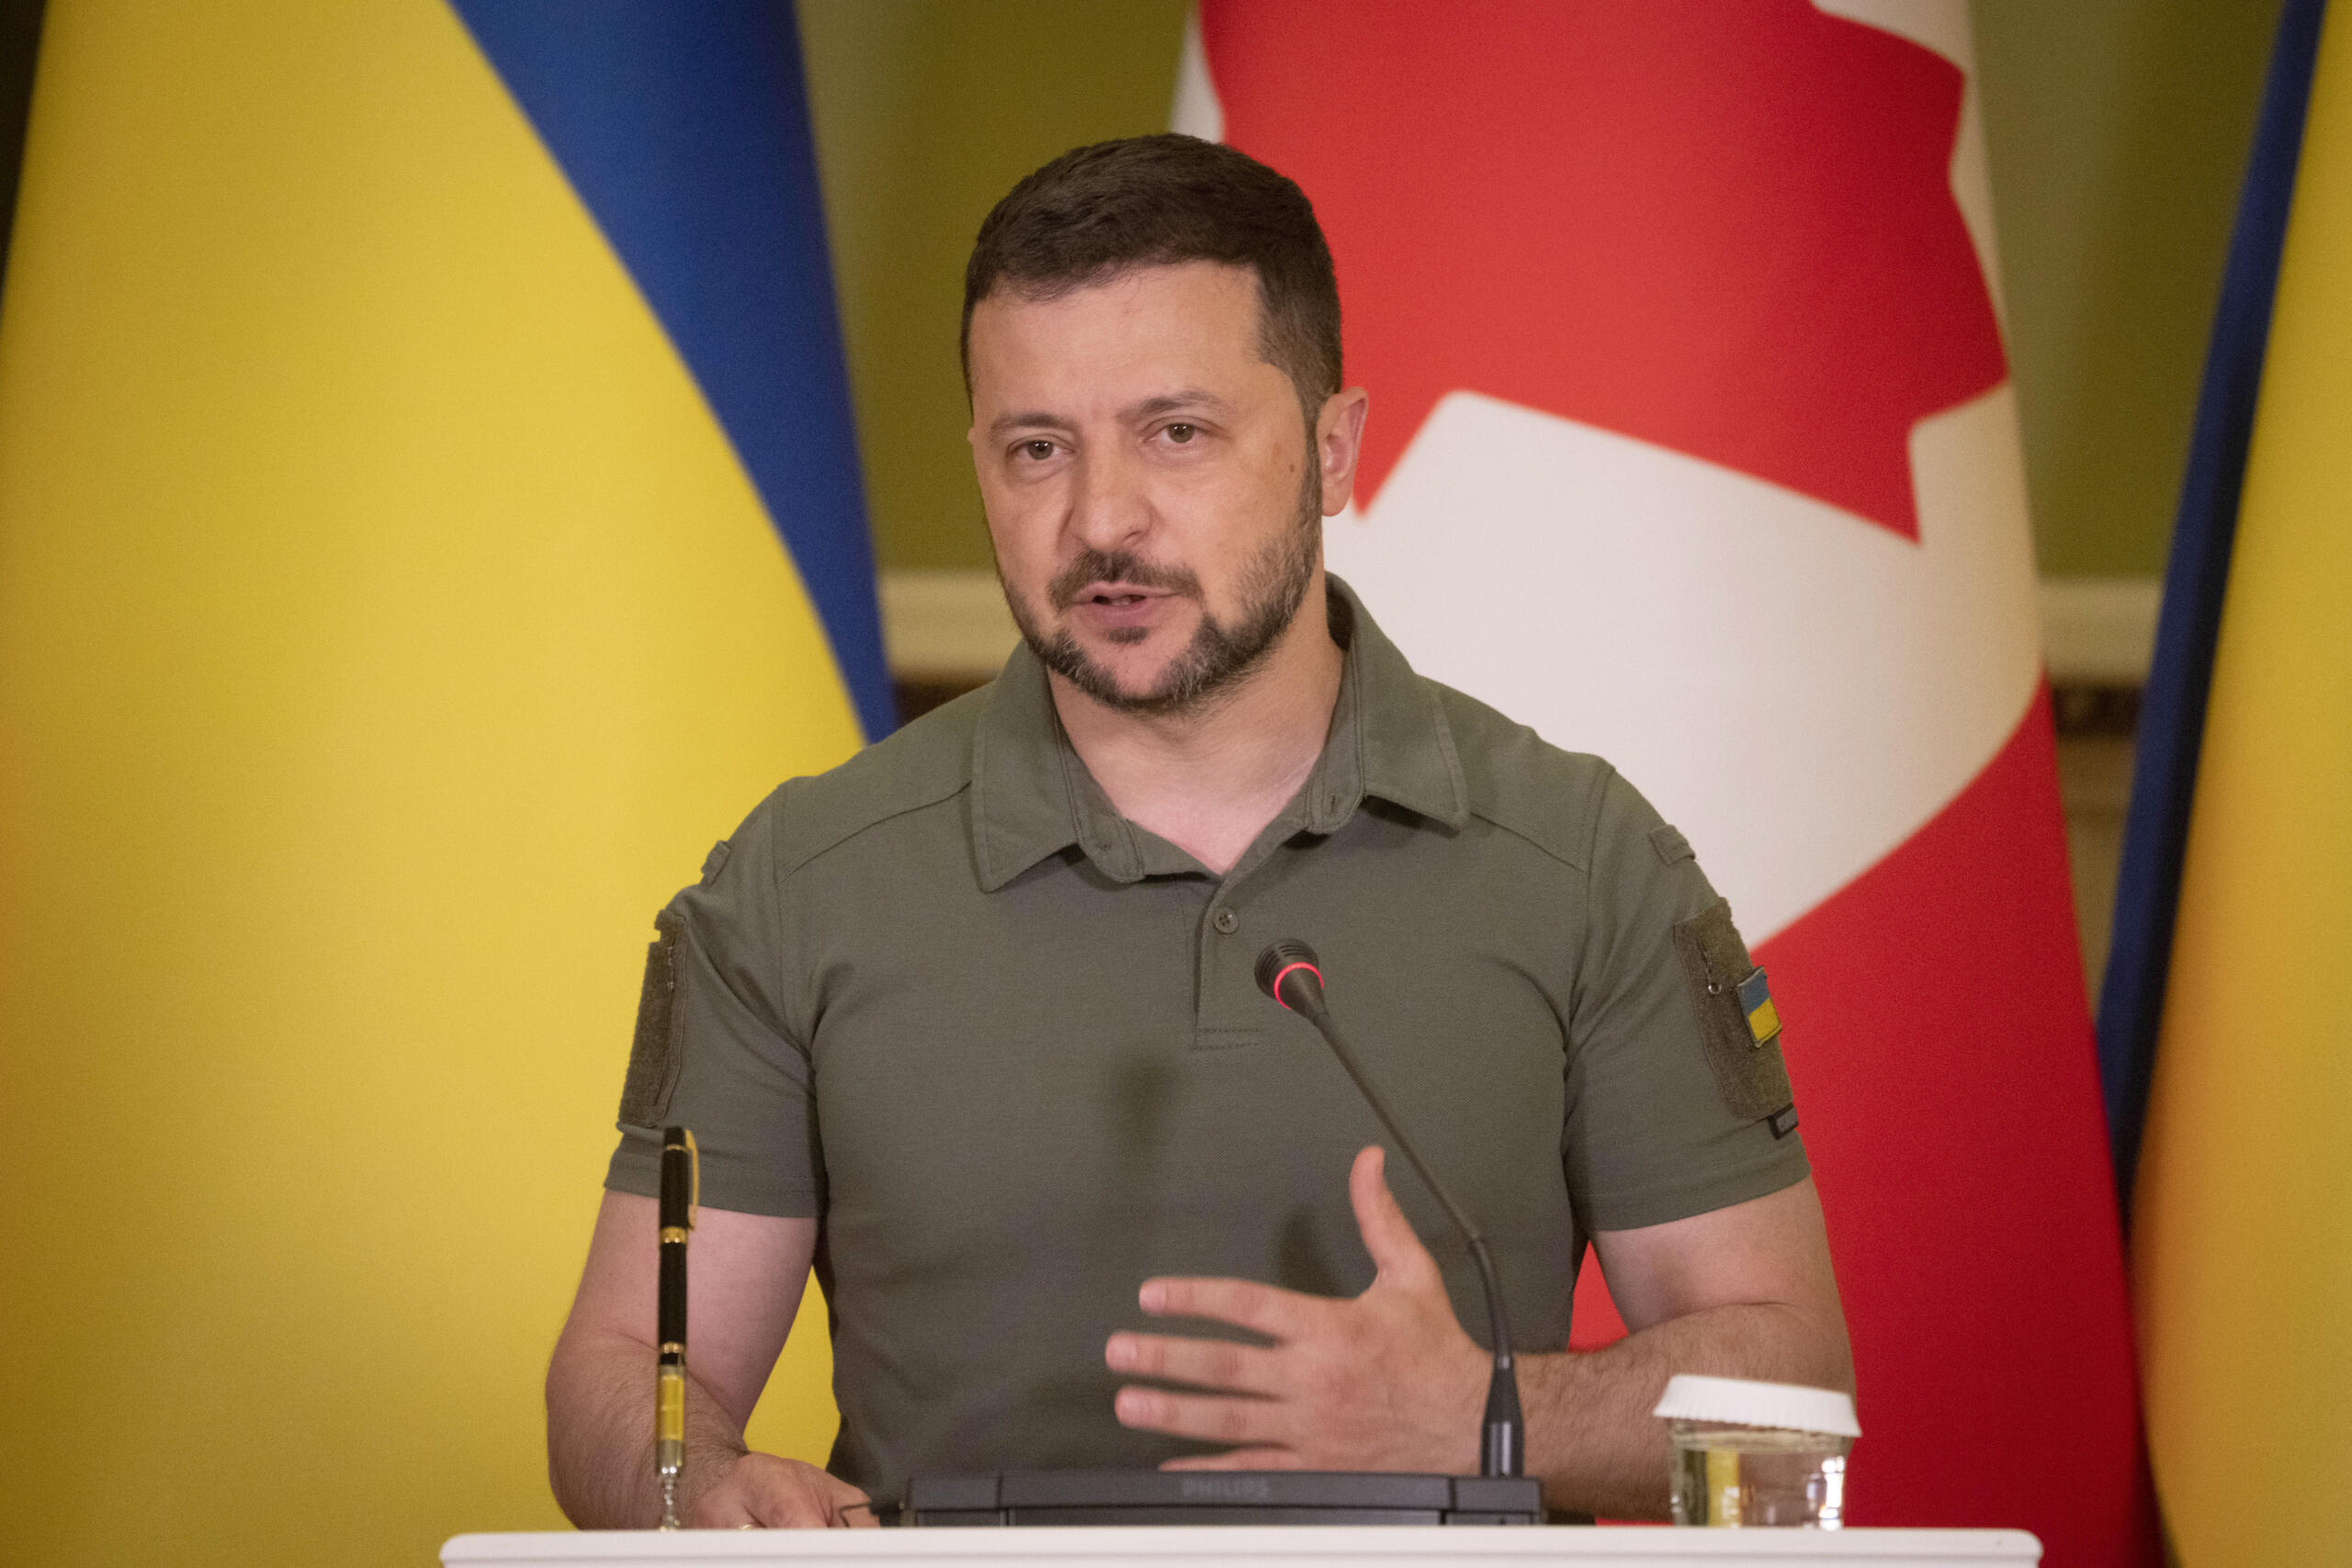 Ukrainian President Volodymyr Zelenskyy speaks during joint press conference with Canada's Prime Minister Justin Trudeau in Kyiv, Ukraine, on Saturday, June 10, 2023.